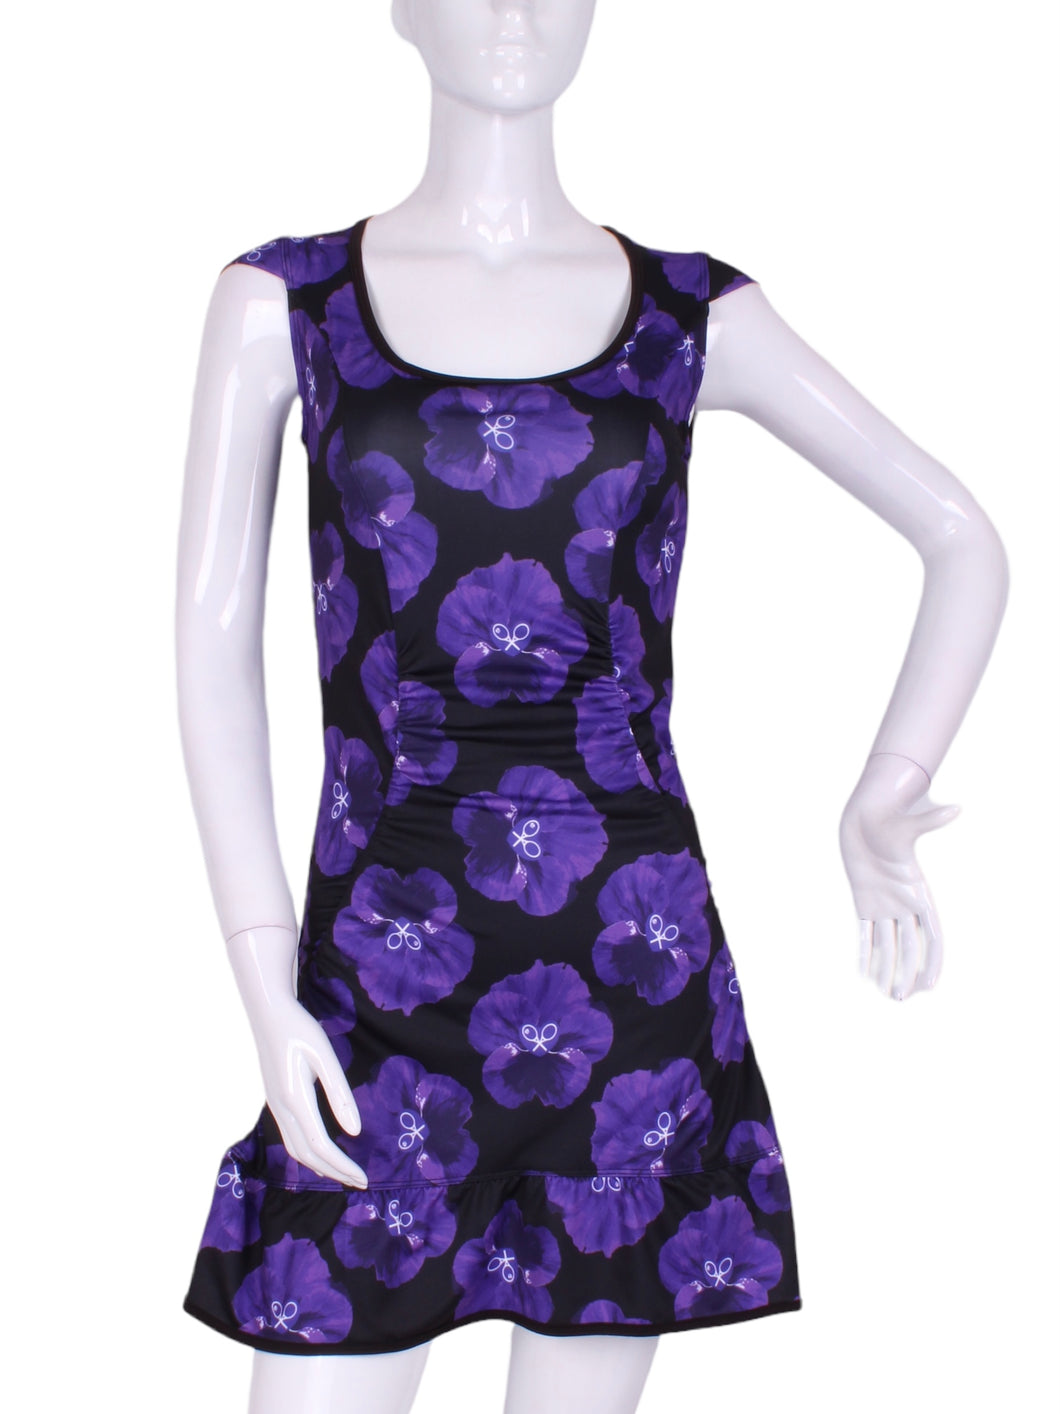 The Monroe Dress has capped sleeves, and moon-shaped ruching in the waistline to accentuate your curves.  This print is very limited, the Purple Pansy, with a flattering scoop neckline.  Glide around in your Court To Cocktail Tennis dress.  Handmade in Los Angeles.